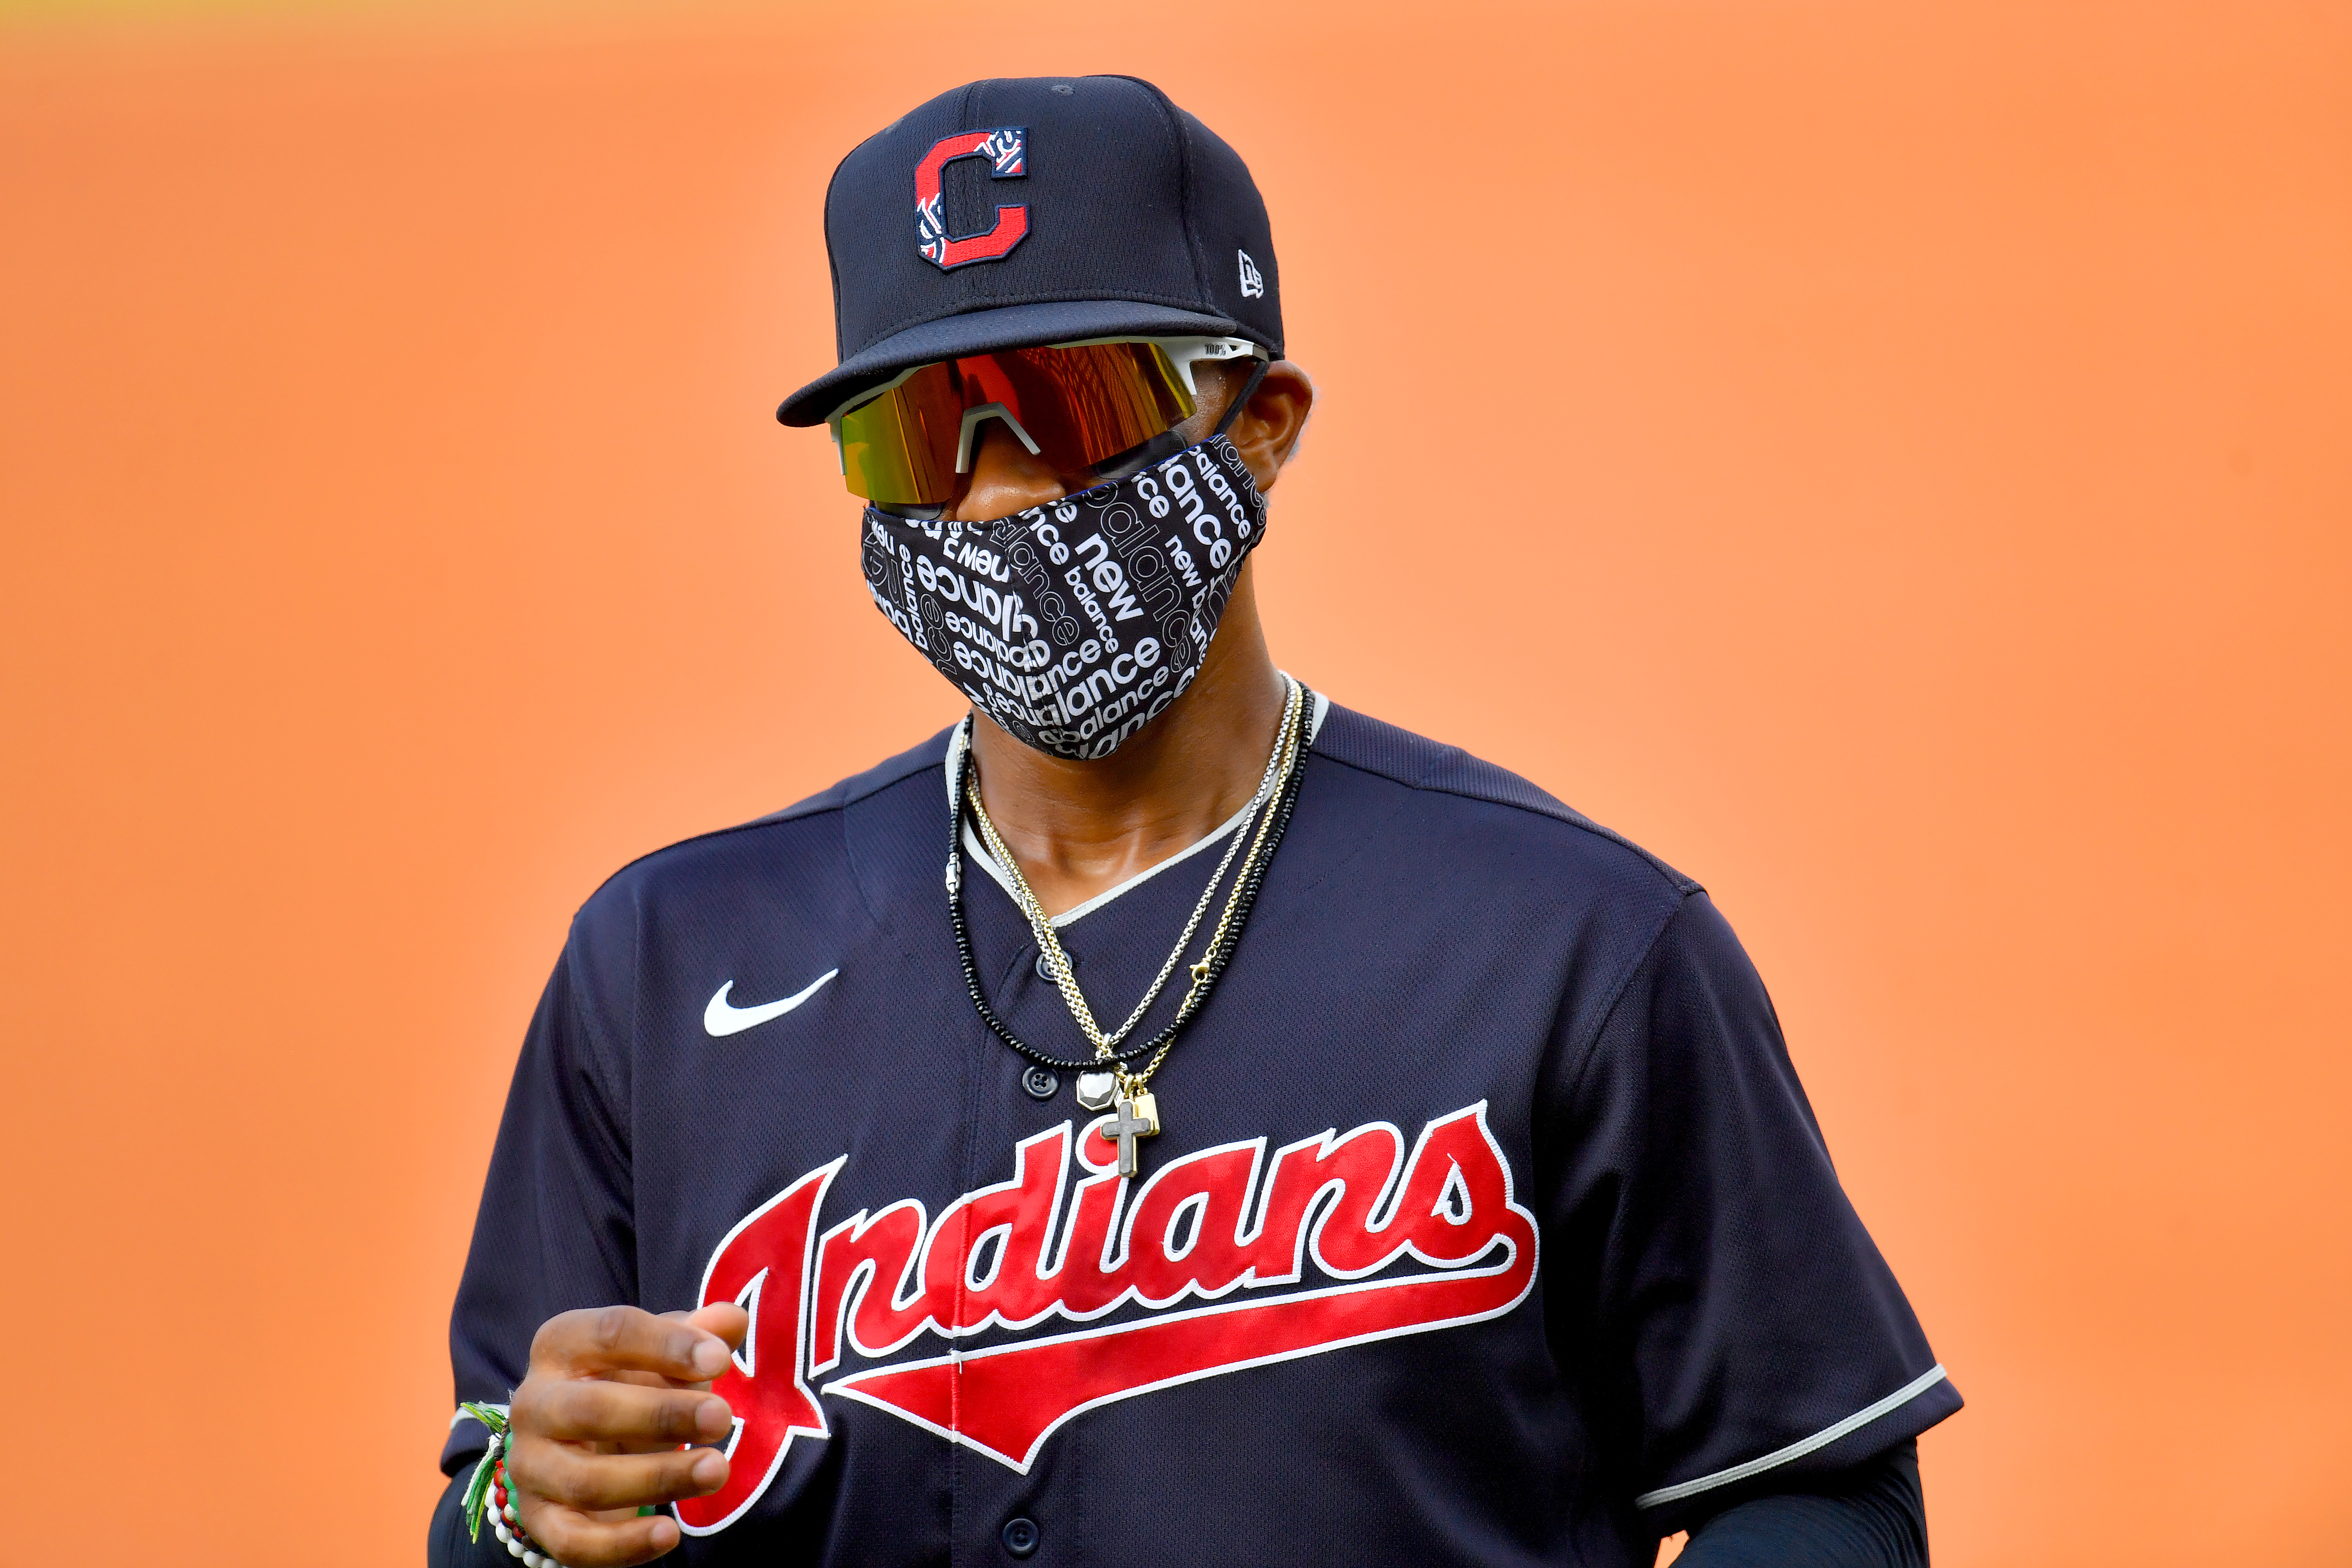 Cleveland Indians will not completely drop Chief Wahoo but will